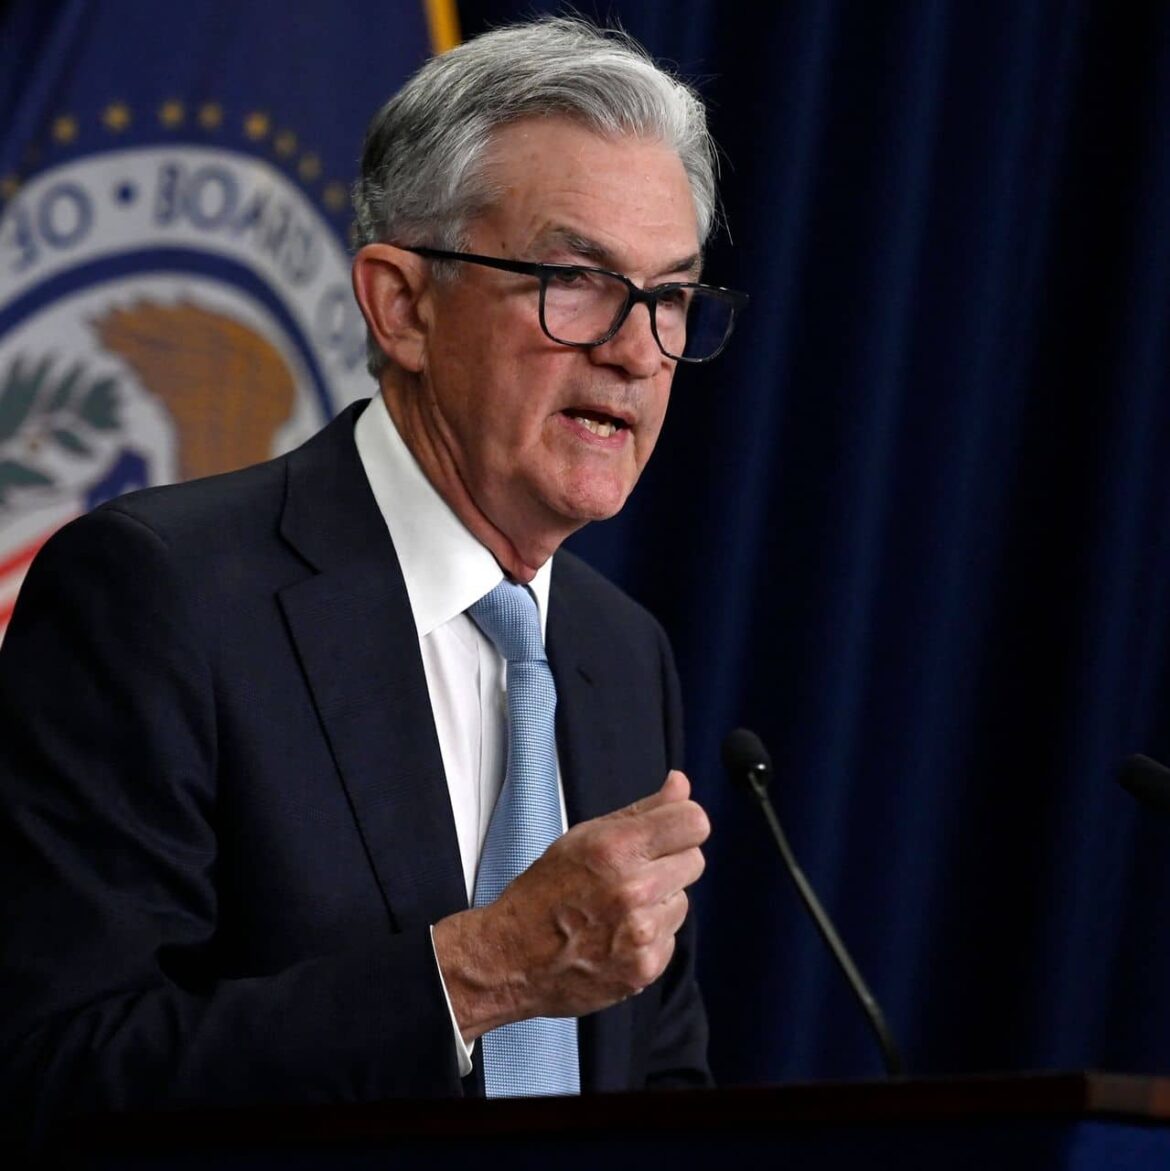 “Sufficiently Restrictive” FOMC Stance On Fed Rate Hike